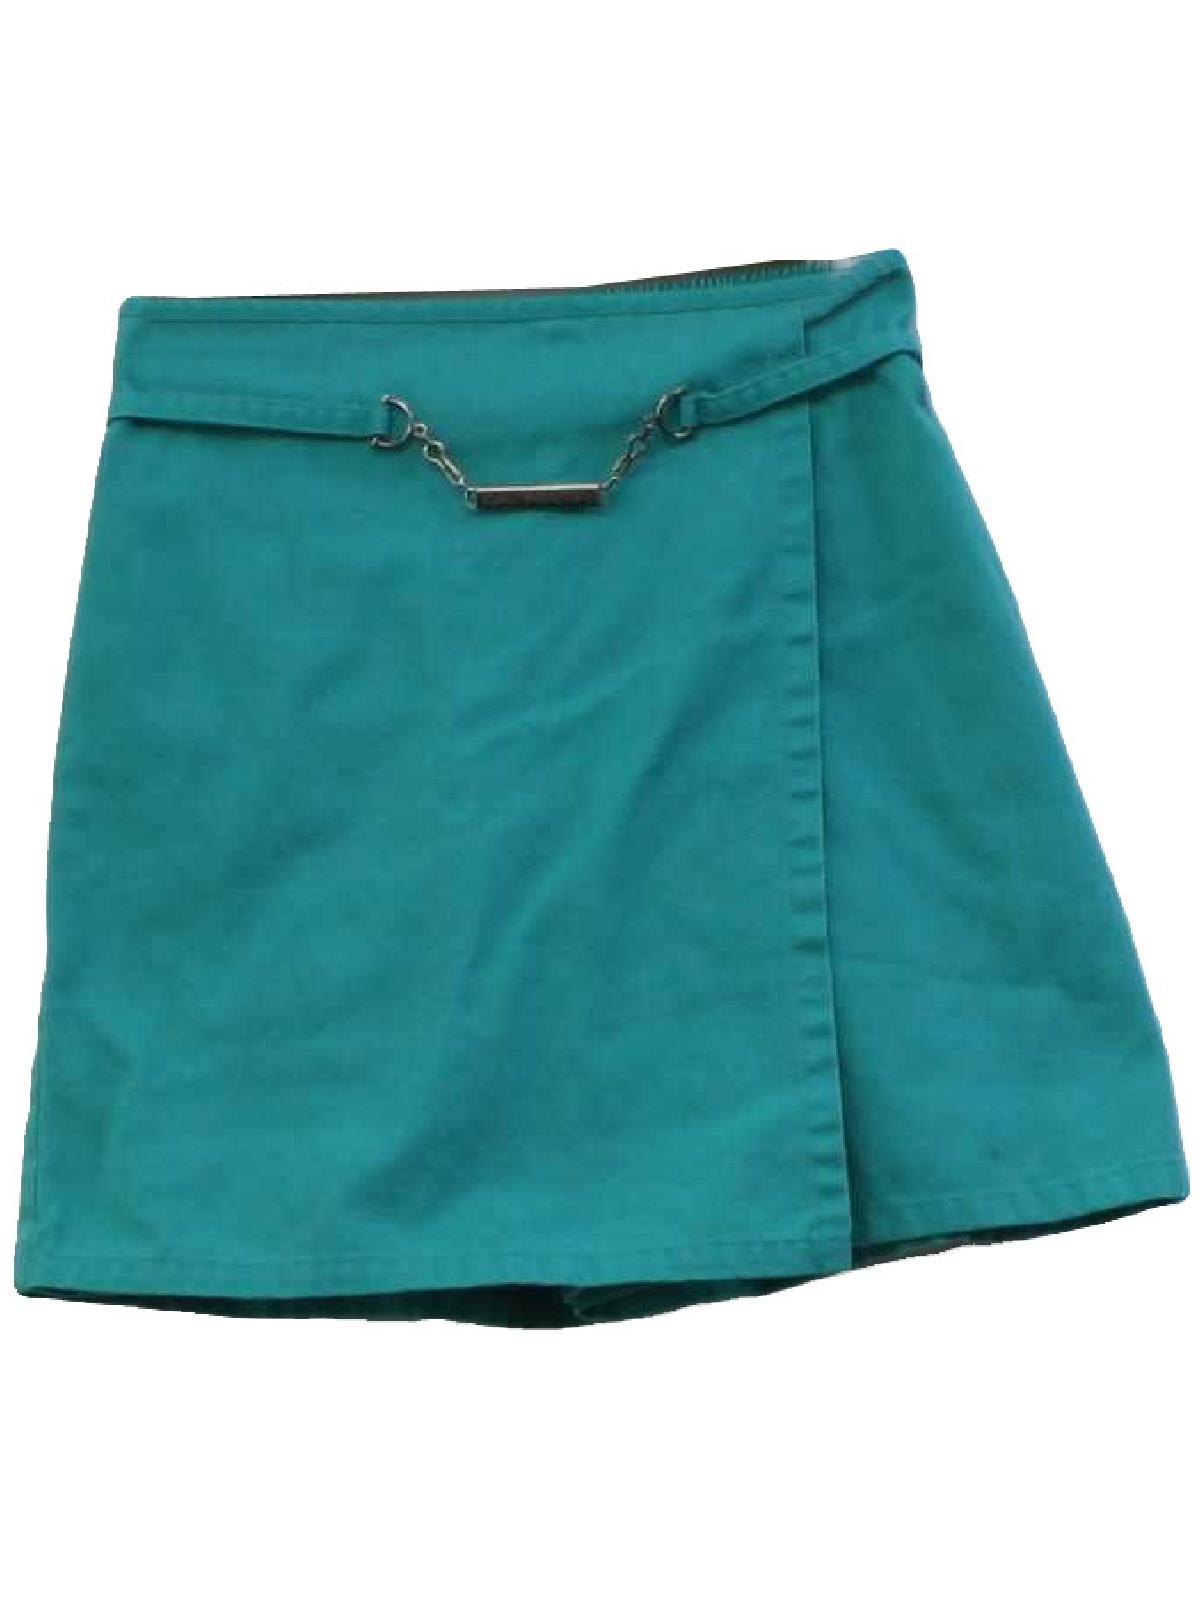 Vintage 80s Shorts: 80s -Girl Scouts Made in USA- Womens or Girls teal ...